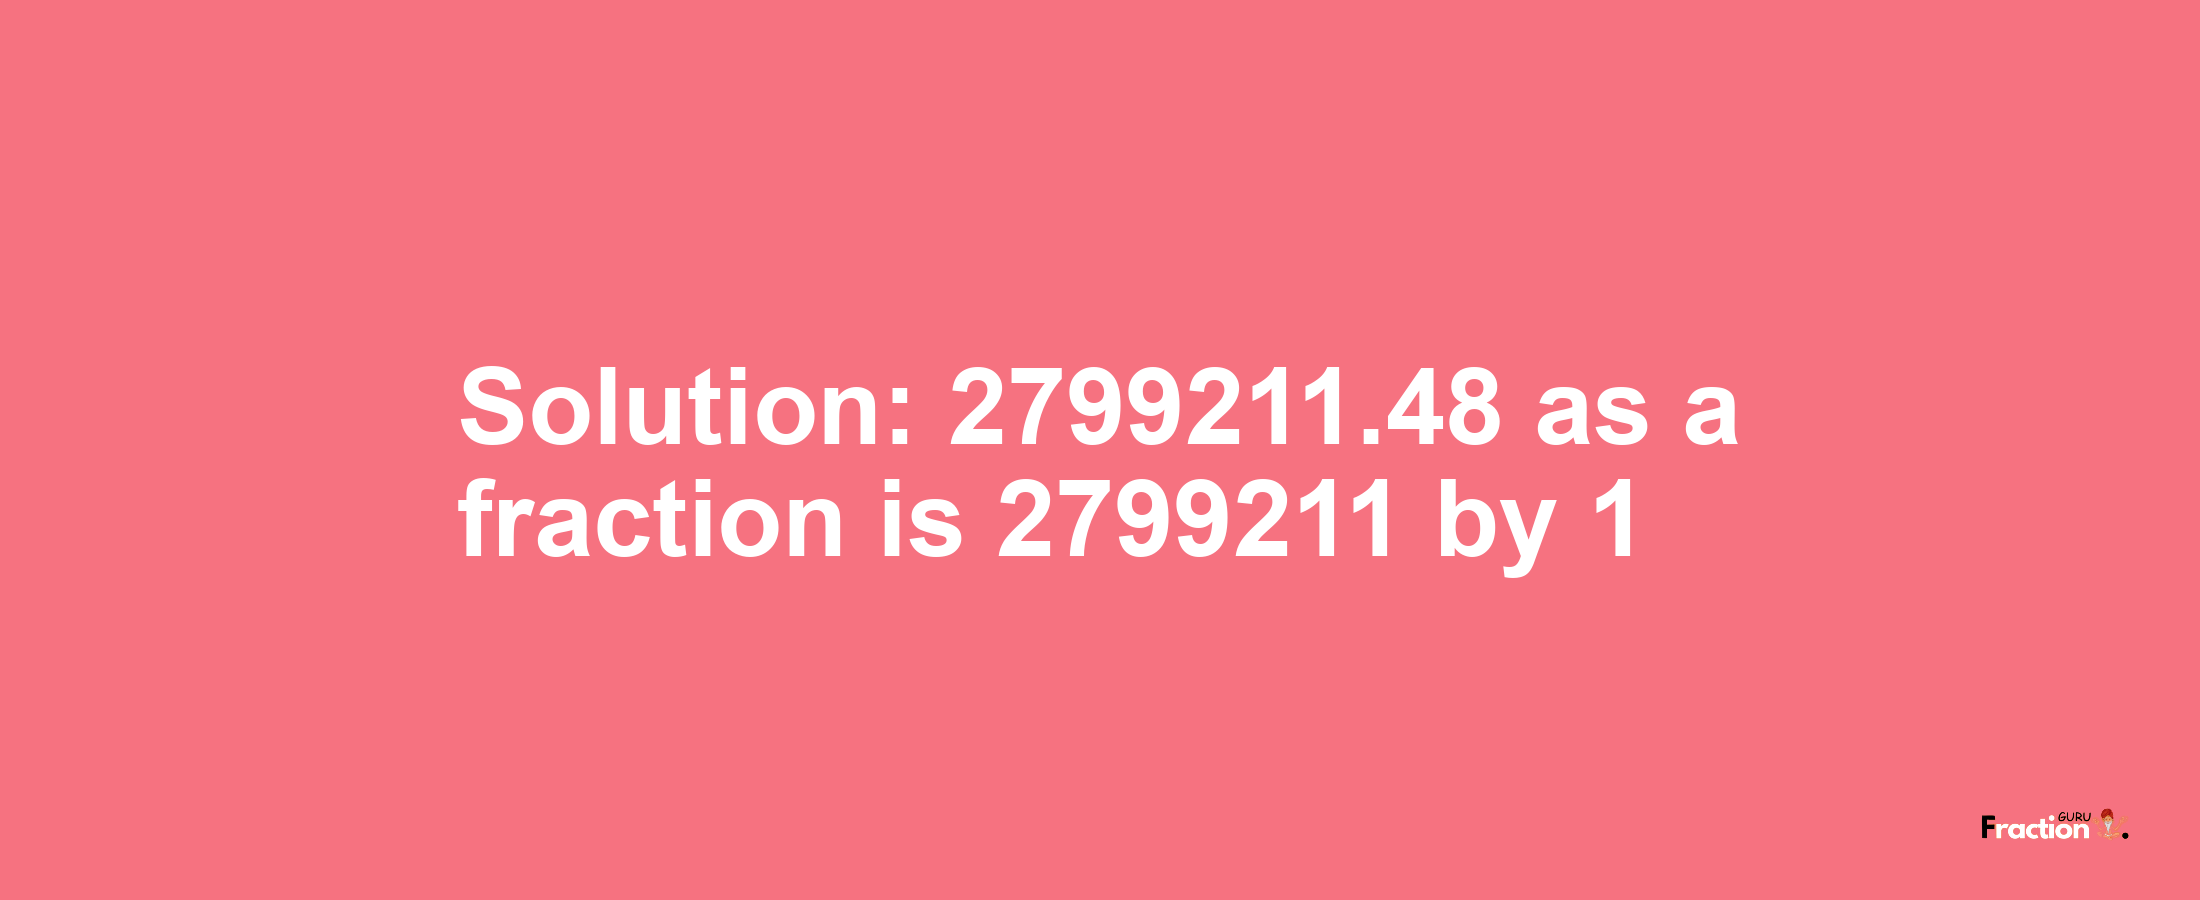 Solution:2799211.48 as a fraction is 2799211/1